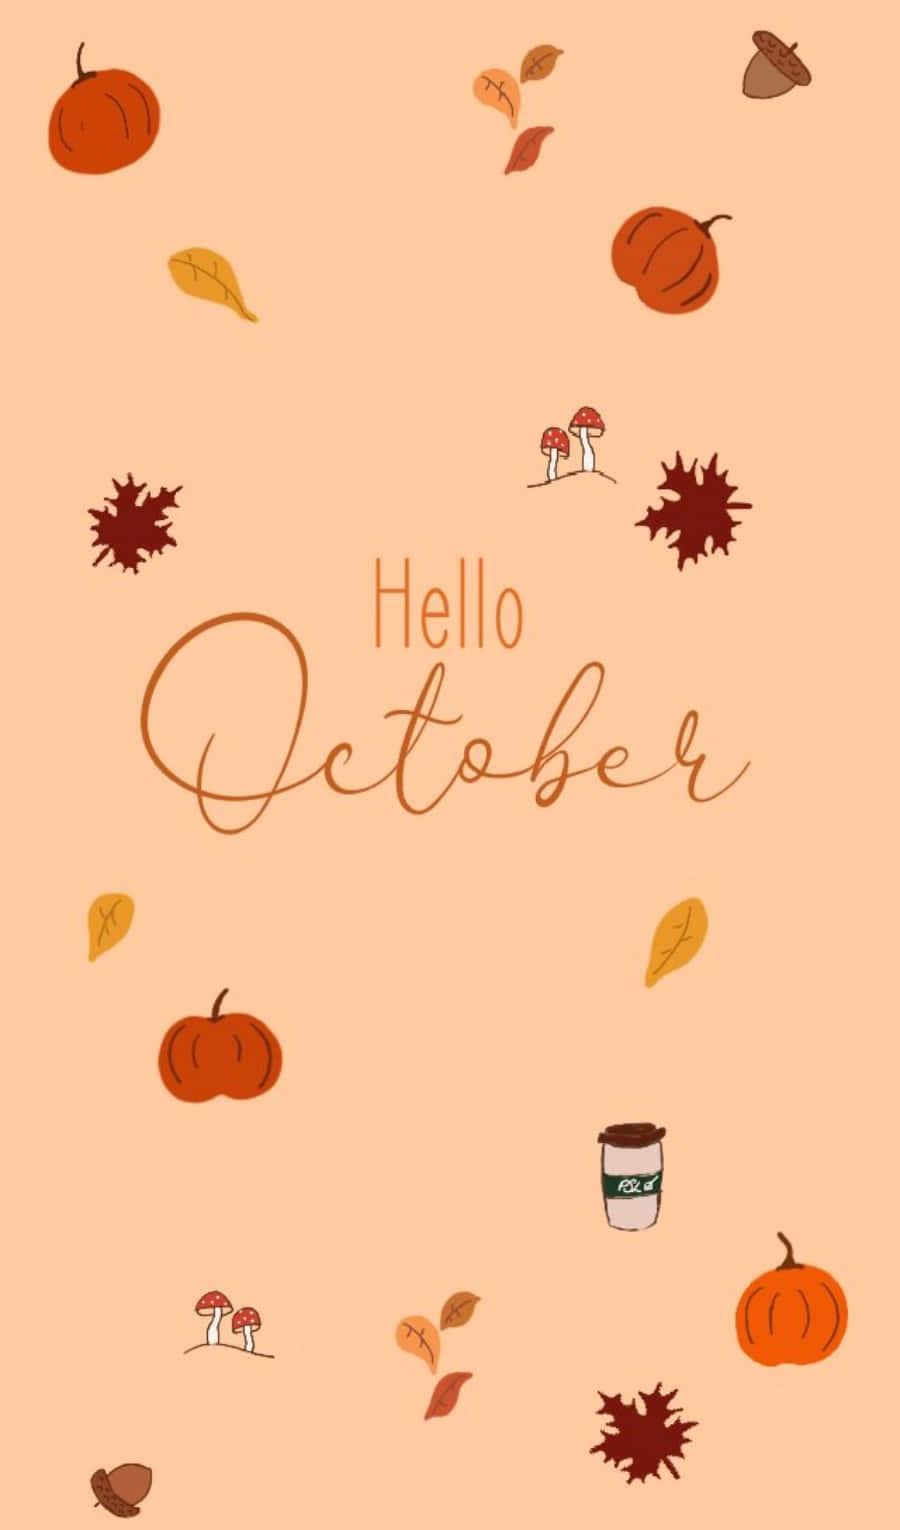 Download October Aesthetic Peach Cover Wallpaper